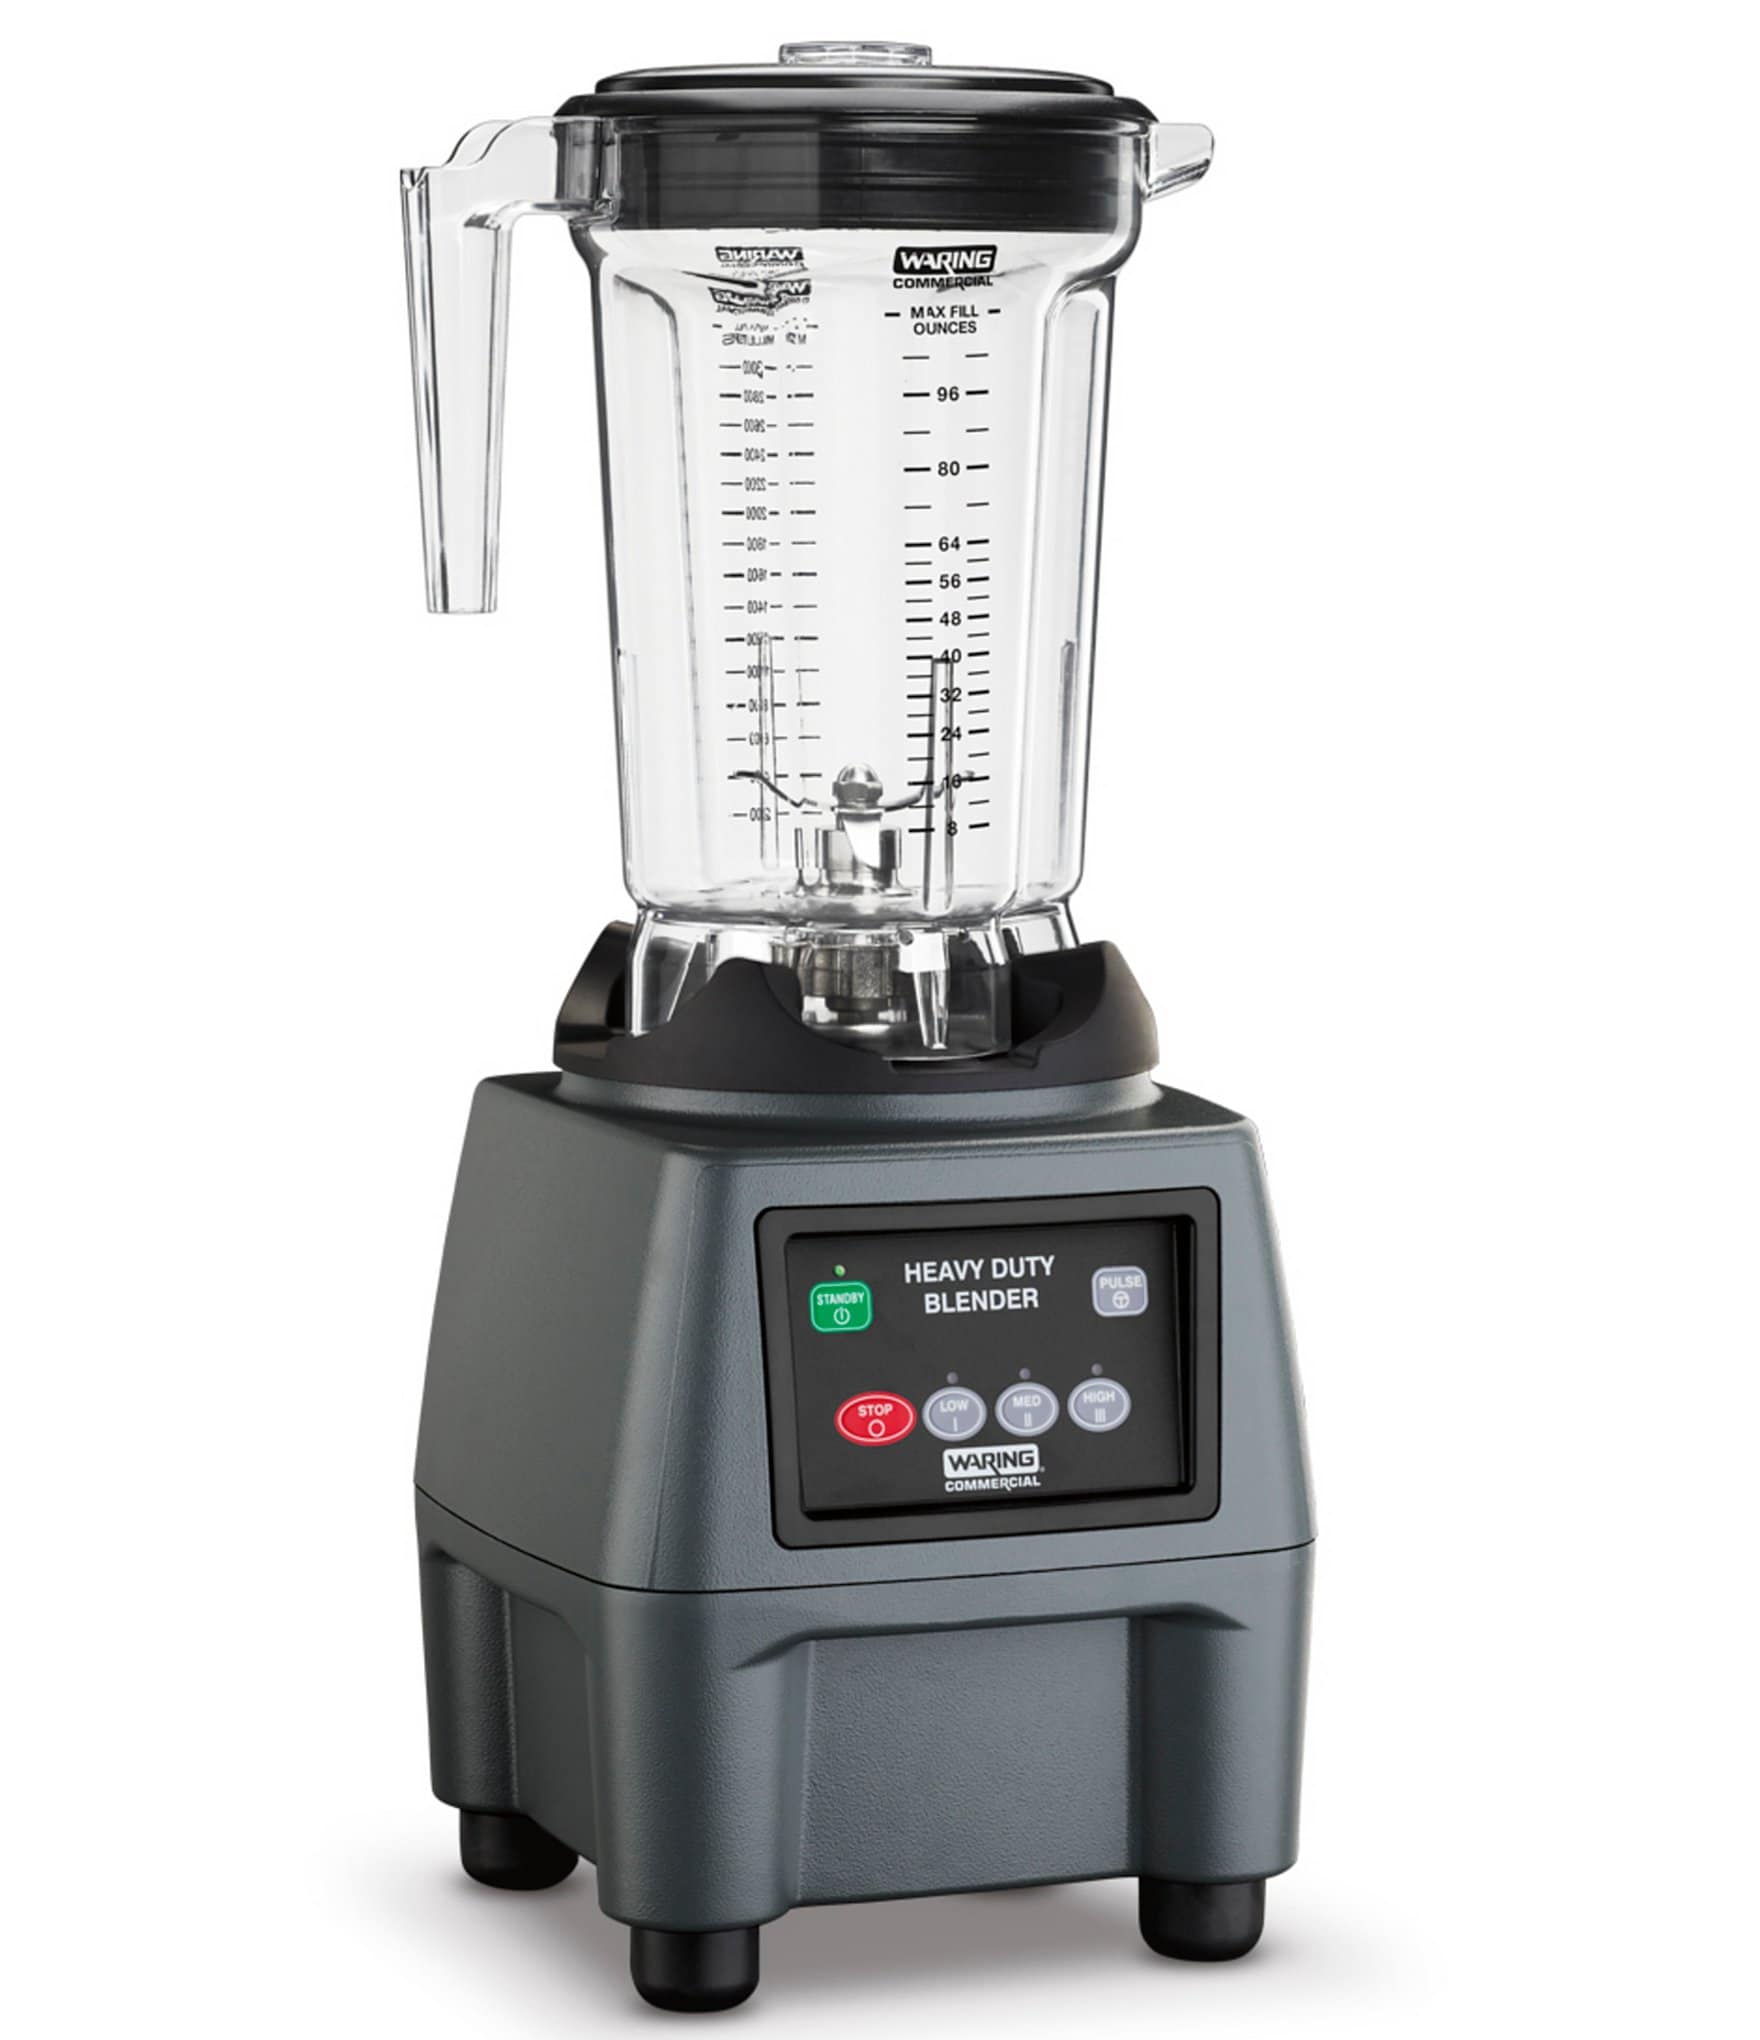 https://dimg.dillards.com/is/image/DillardsZoom/zoom/waring--1-gallon-3-speed-food-blender-with-copolyester-container/20120992_zi.jpg